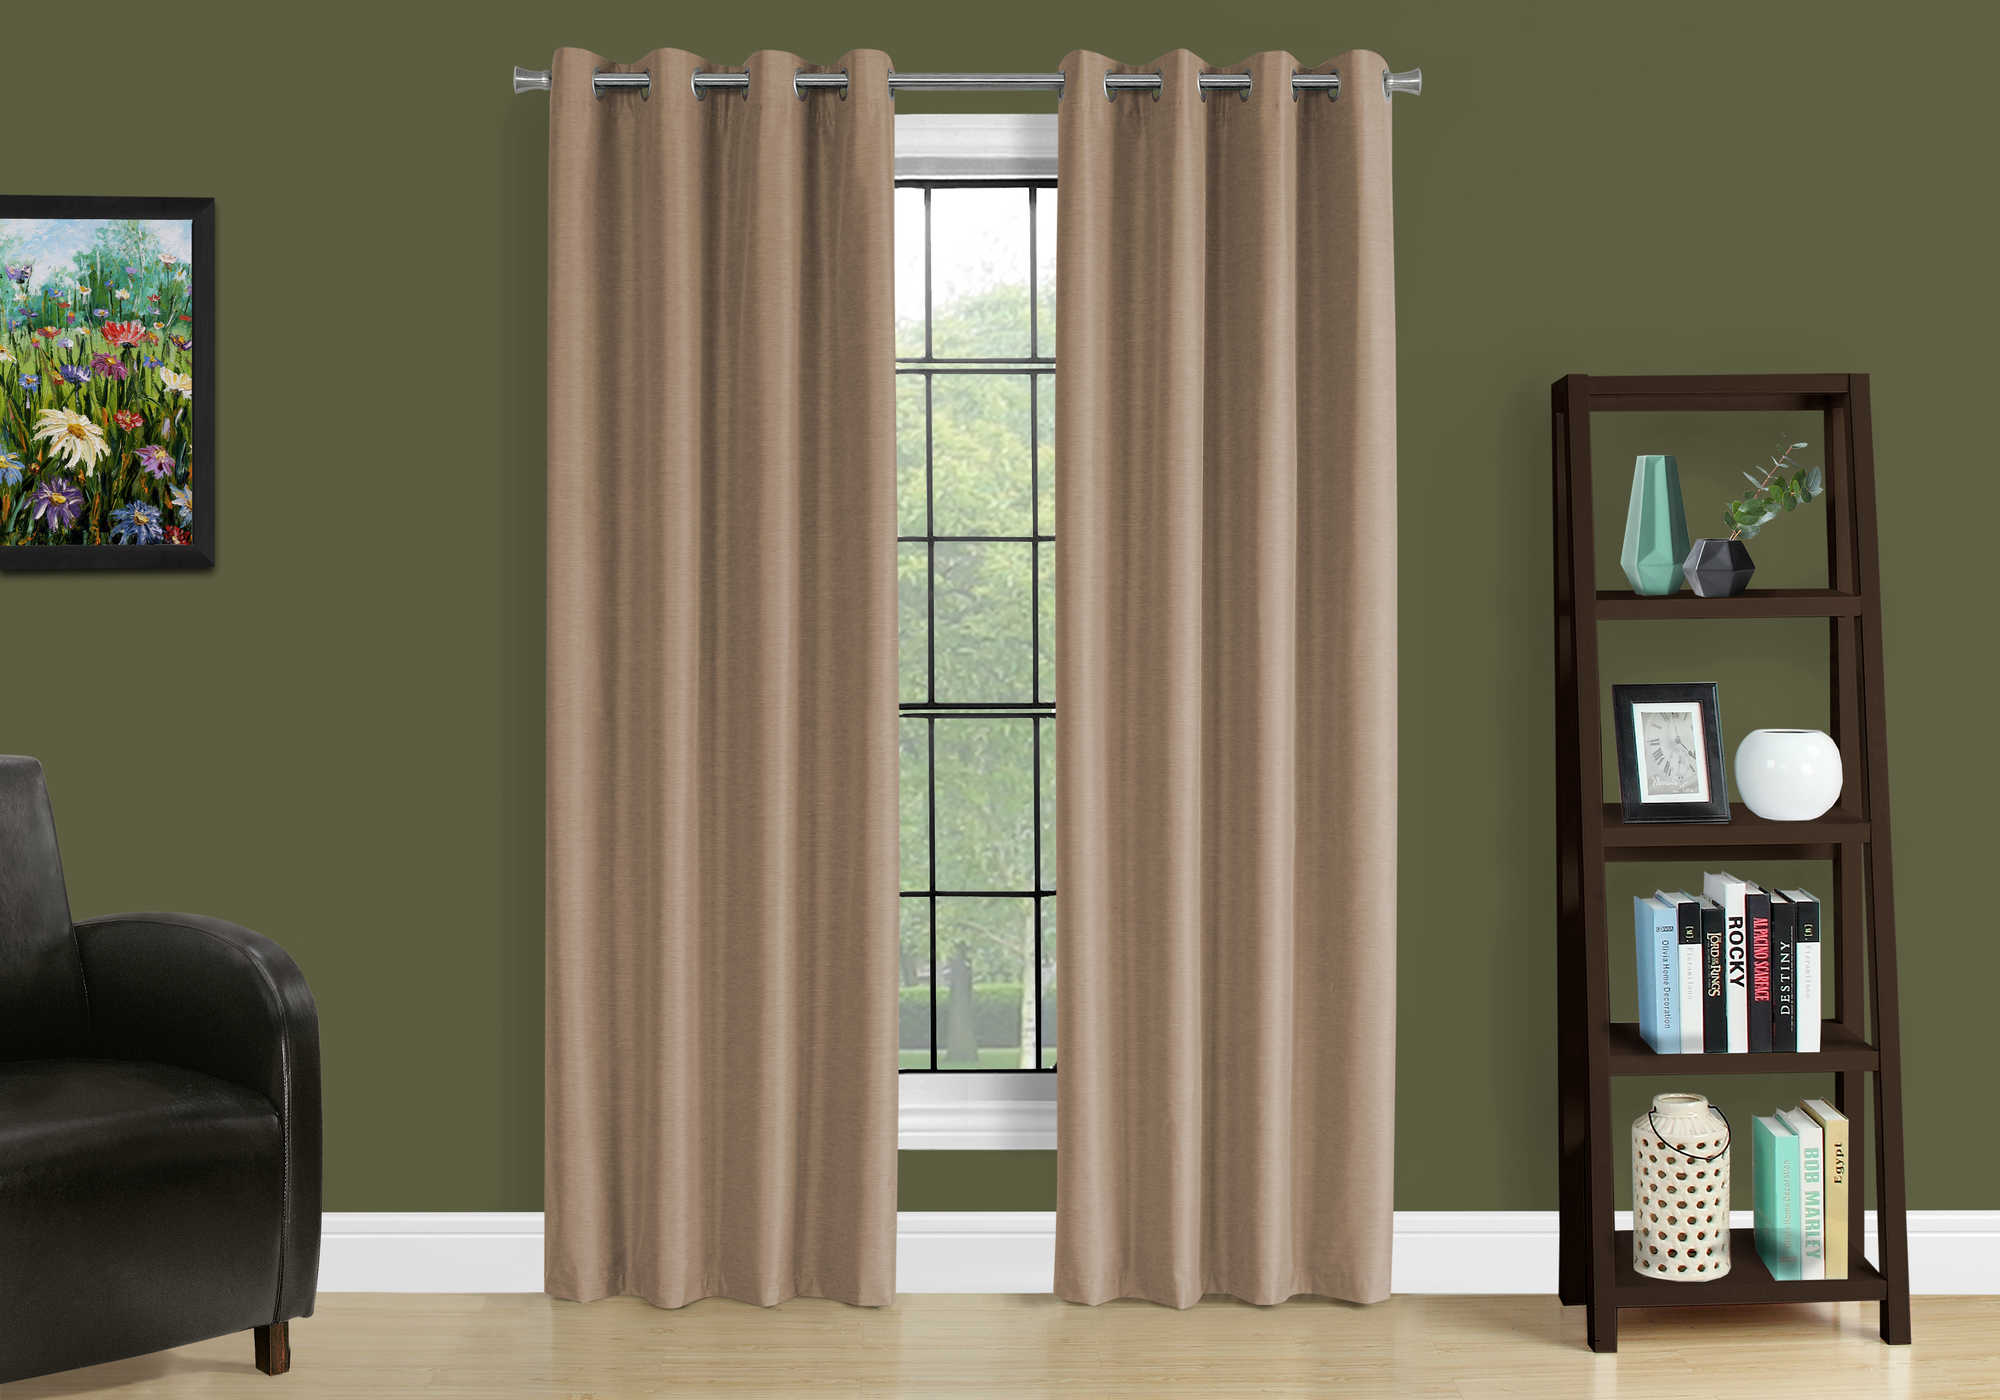 CURTAIN PANEL - 2PCS / 52"W X 95"H BROWN SOLID BLACKOUT